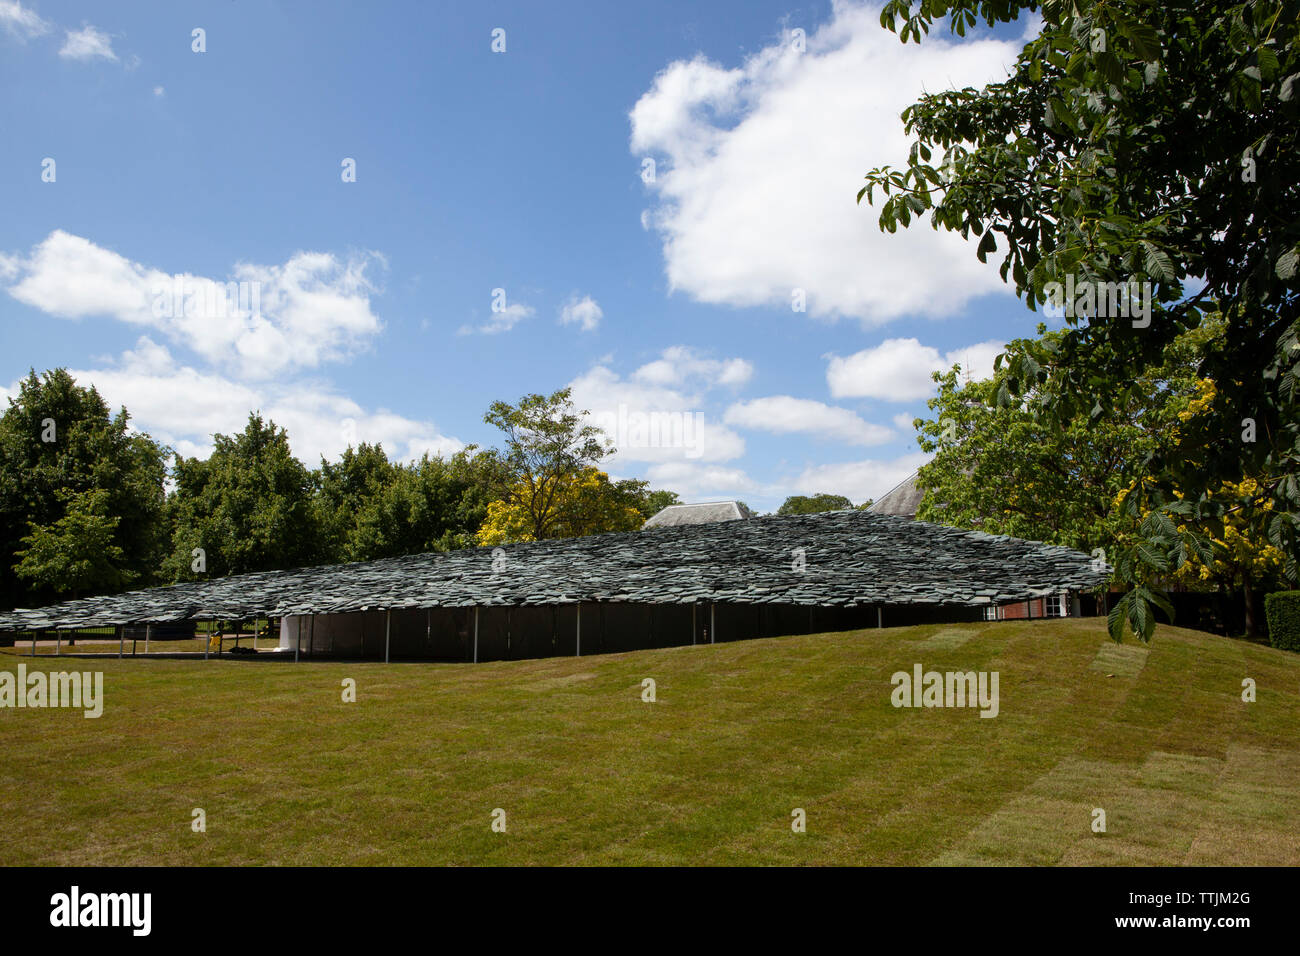 The Serpentine Gallery Summer Pavillion 2019 in London's Hyde Park is designed by Japanese architects Junya Ishigami + Associates and features a curve Stock Photo